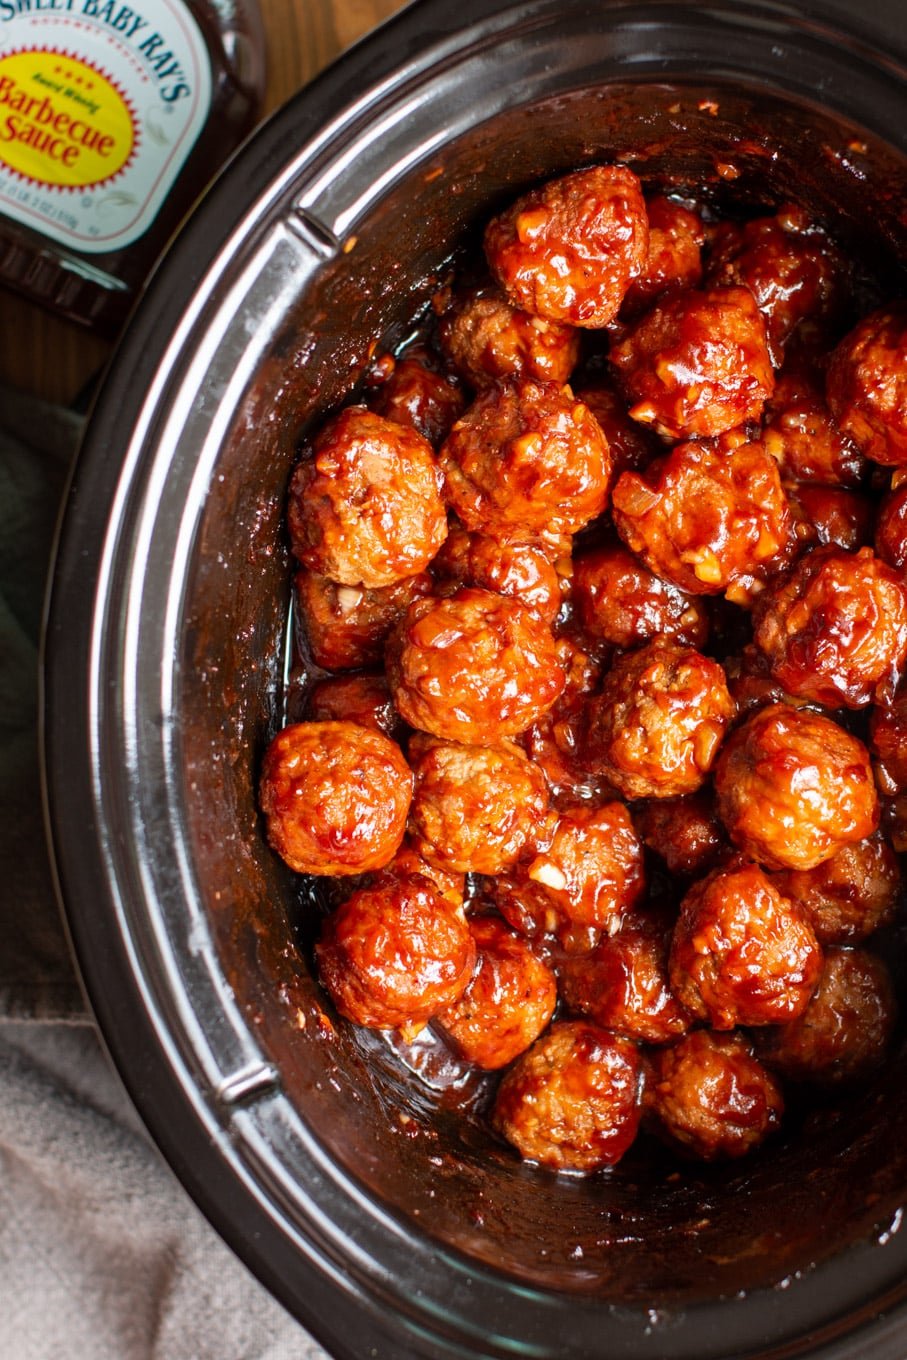 meatballs in barbecue sauce in a slow cooker.